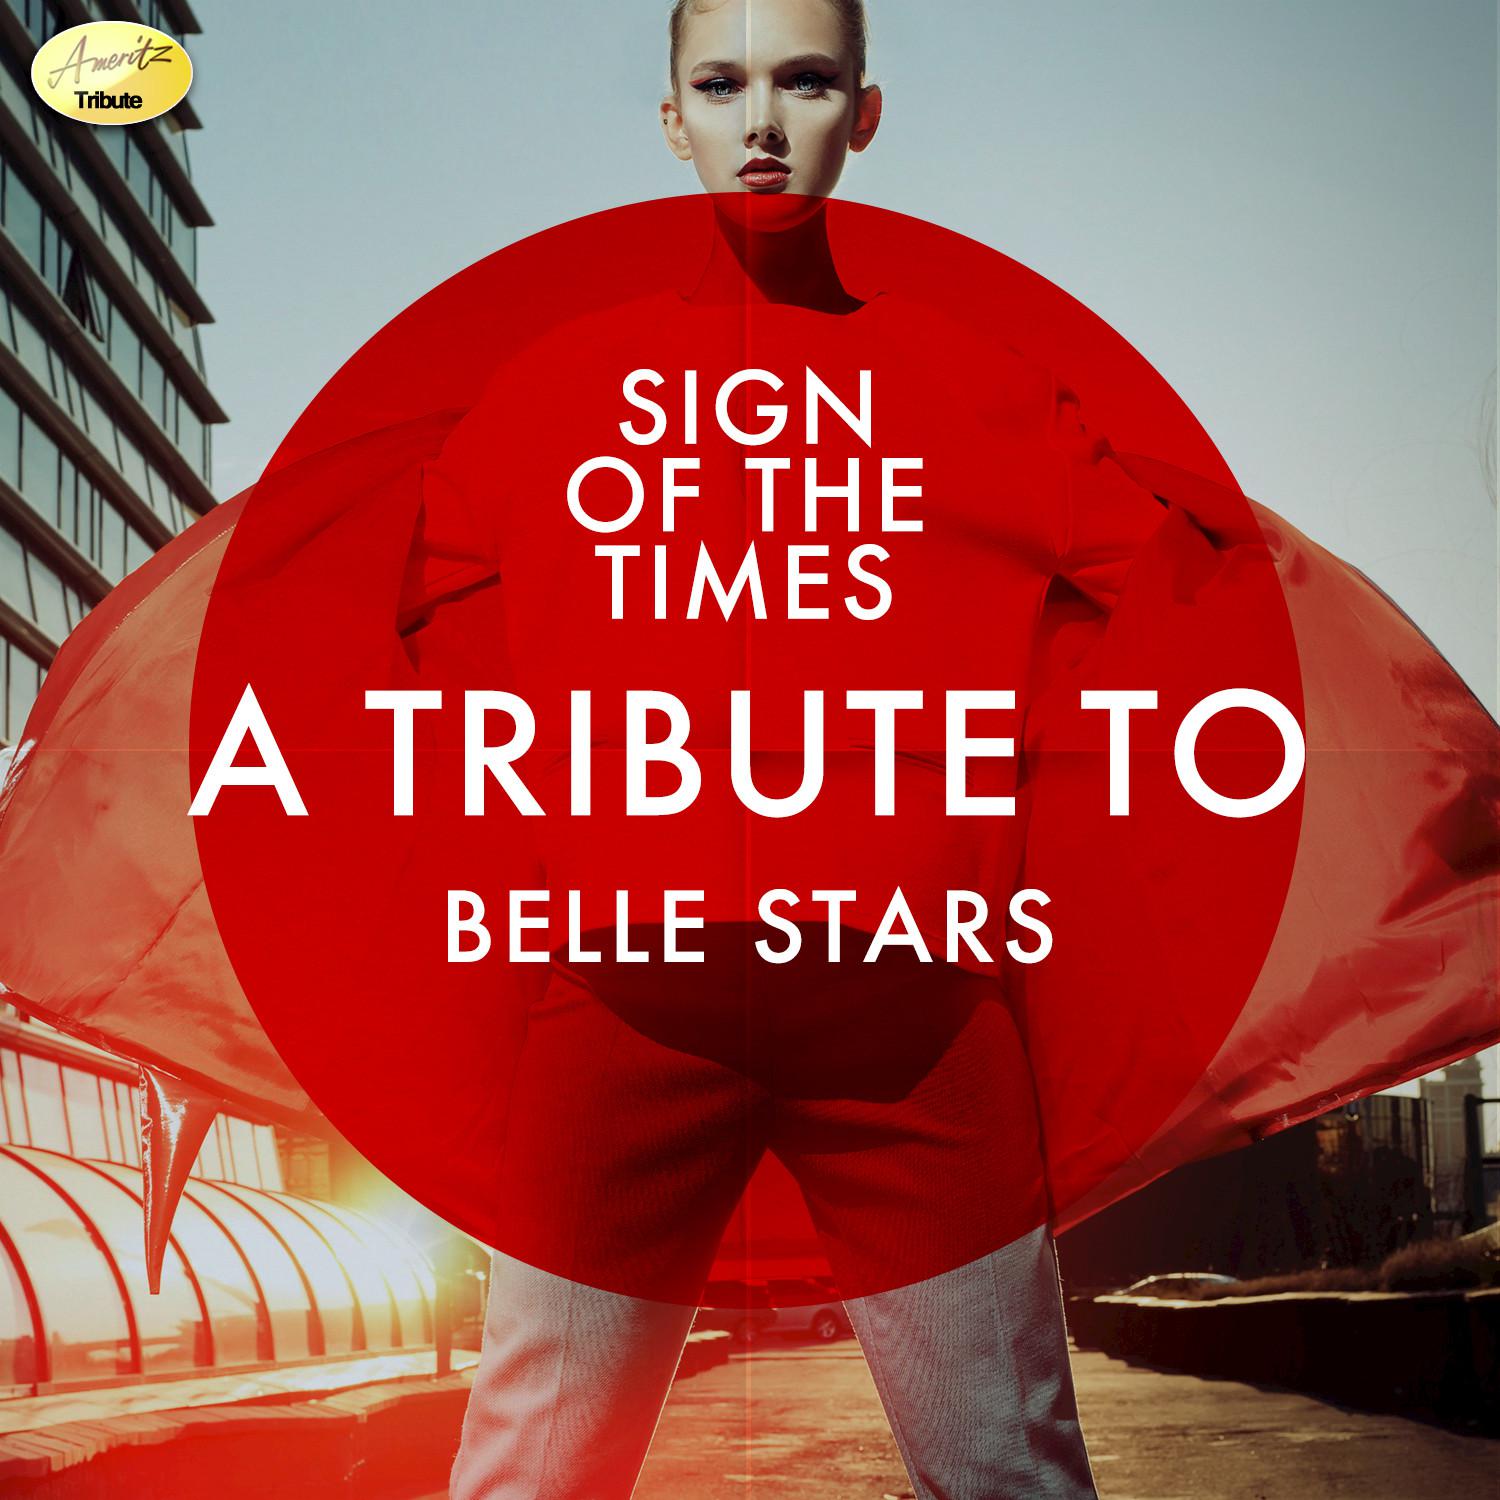 Sign of the Times - A Tribute to Belle Stars